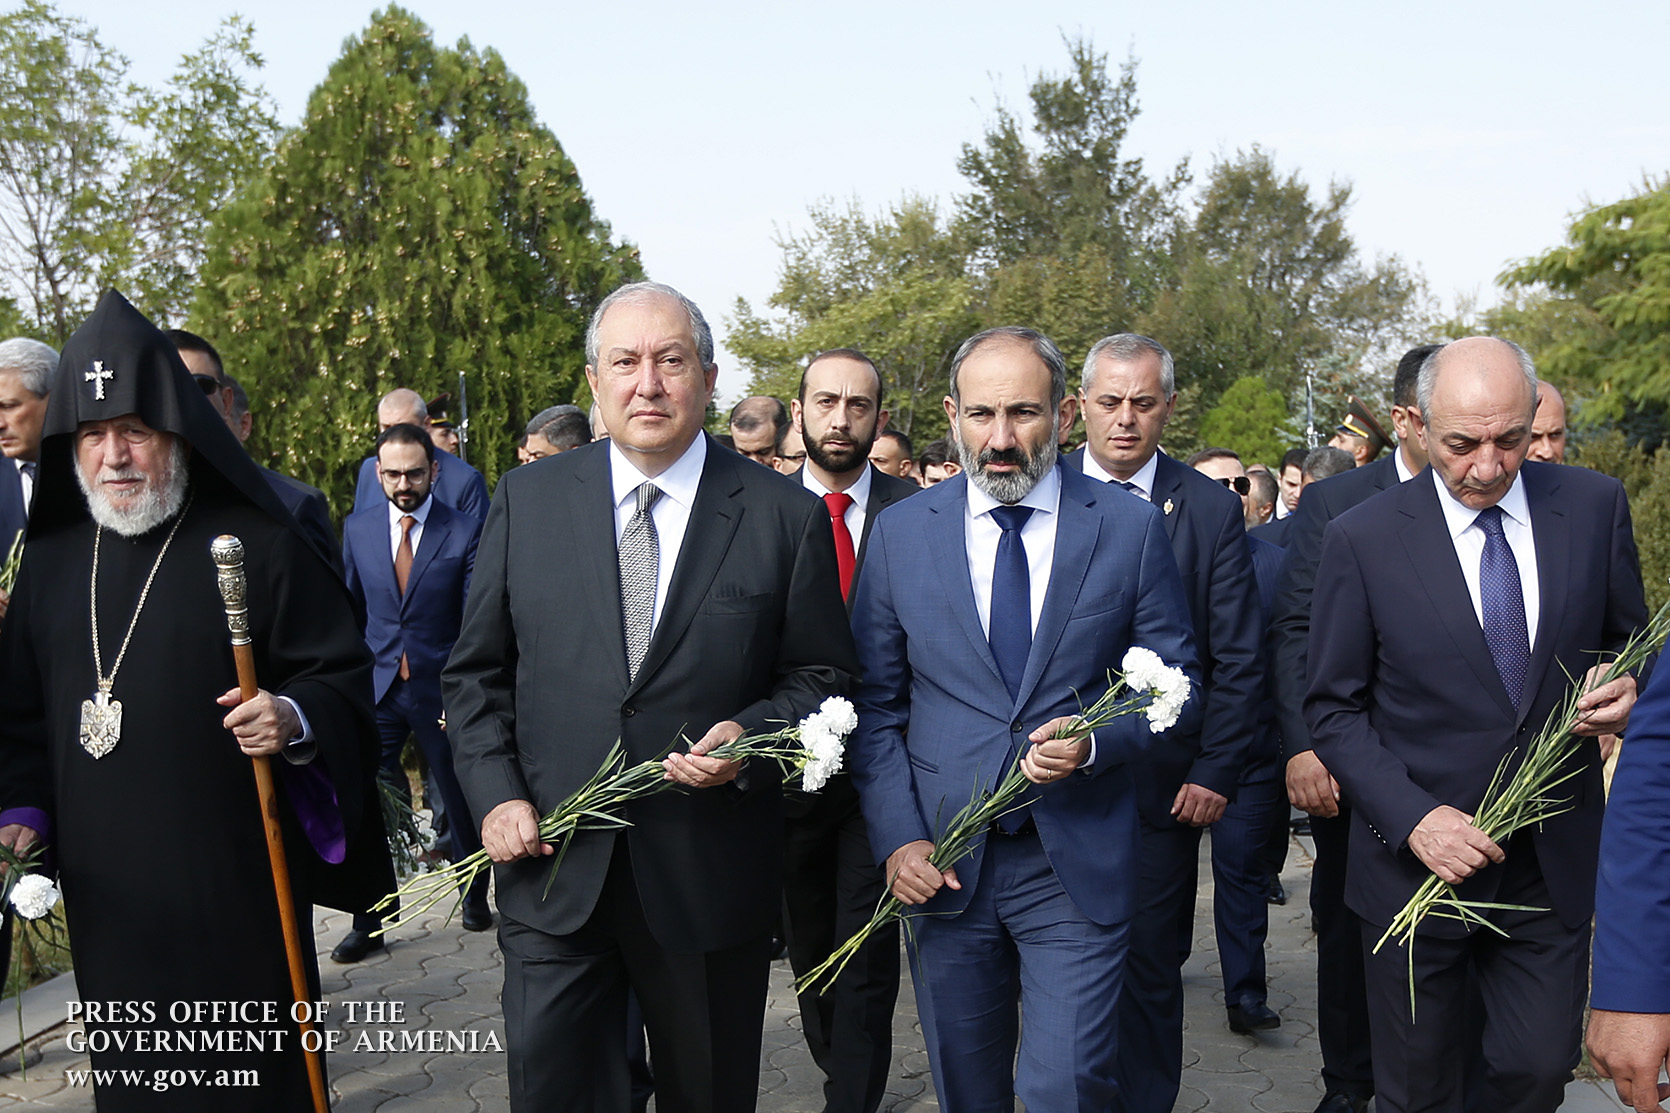 PM visits Yerablur pantheon on 27th anniversary of Armenia’s independence